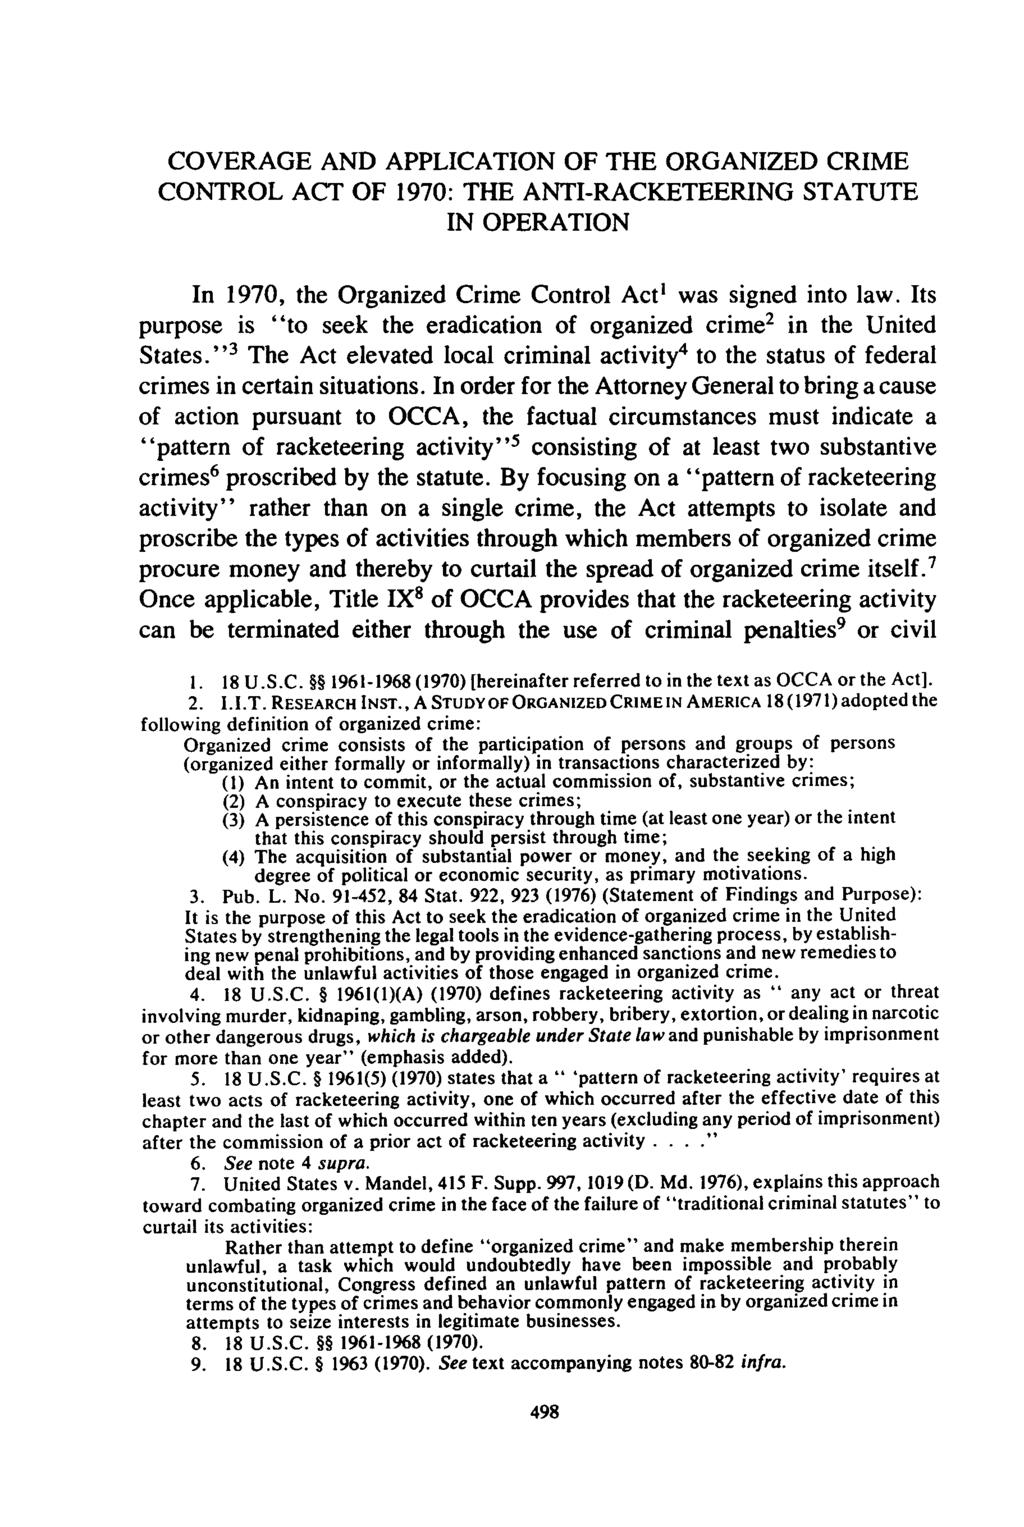 COVERAGE AND APPLICATION OF THE ORGANIZED CRIME CONTROL ACT OF 1970: THE ANTI-RACKETEERING STATUTE IN OPERATION In 1970, the Organized Crime Control Act' was signed into law.